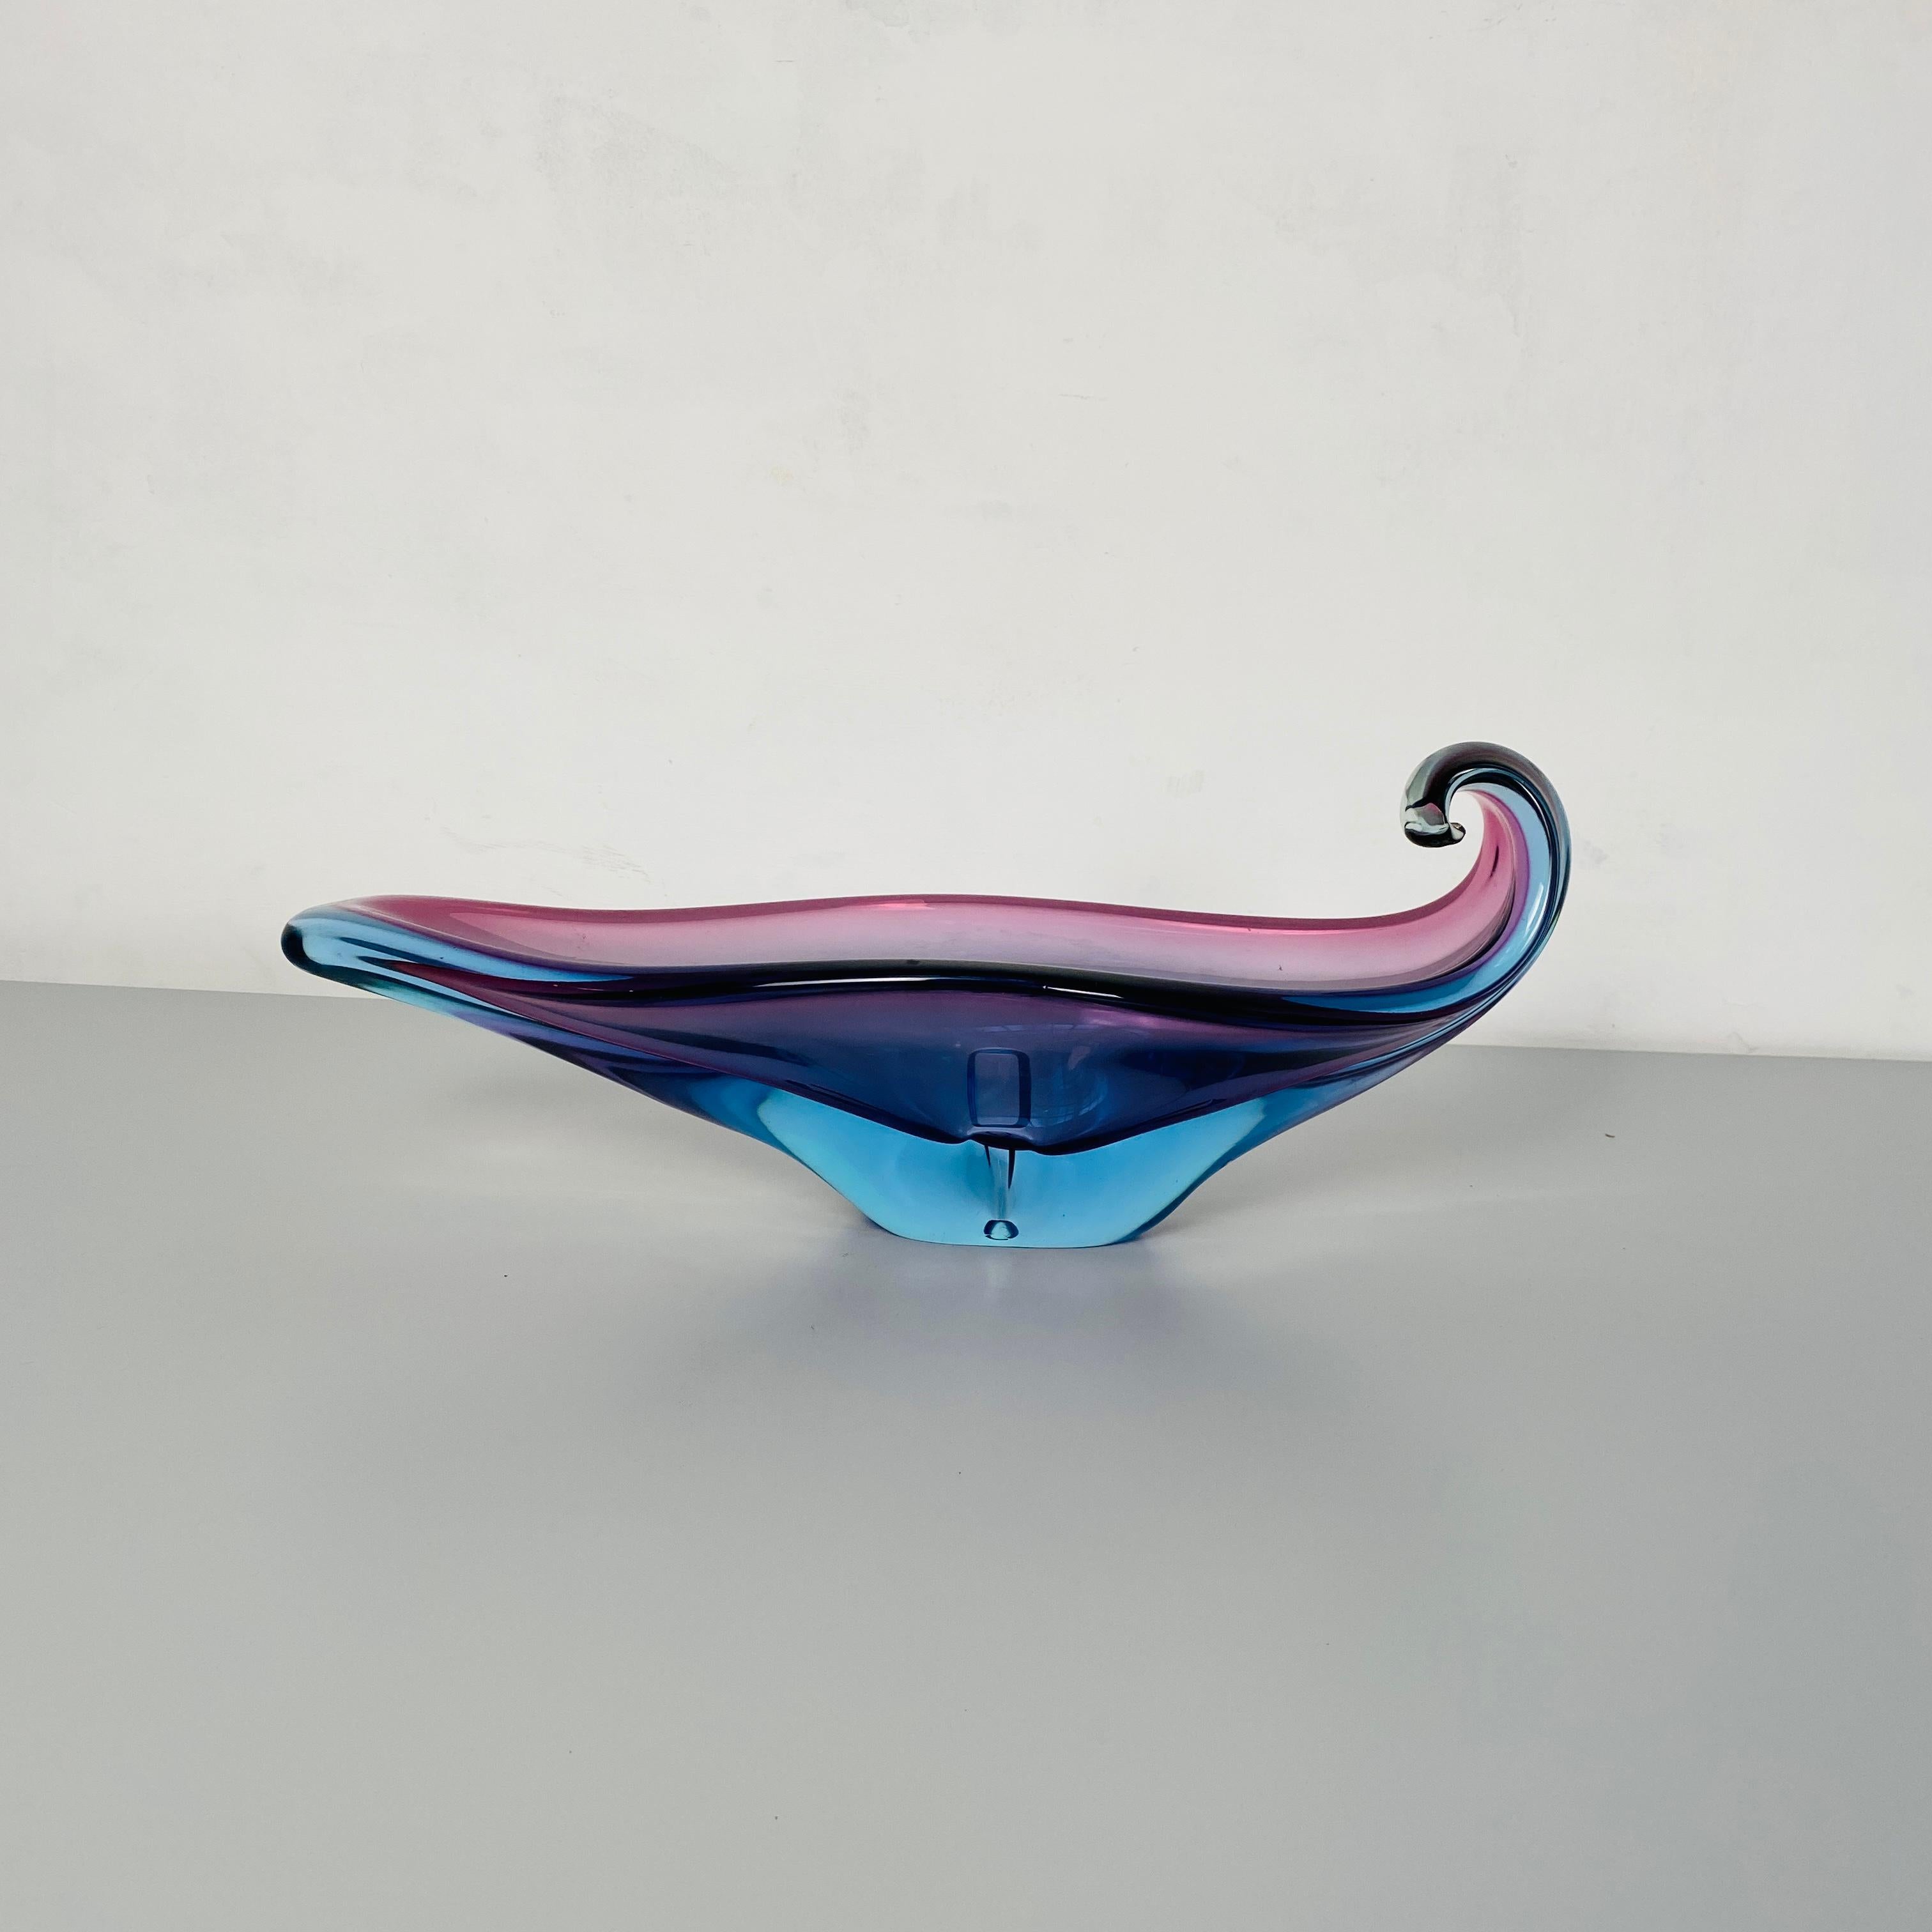 Murano Glass Boat - 2 For Sale on 1stDibs